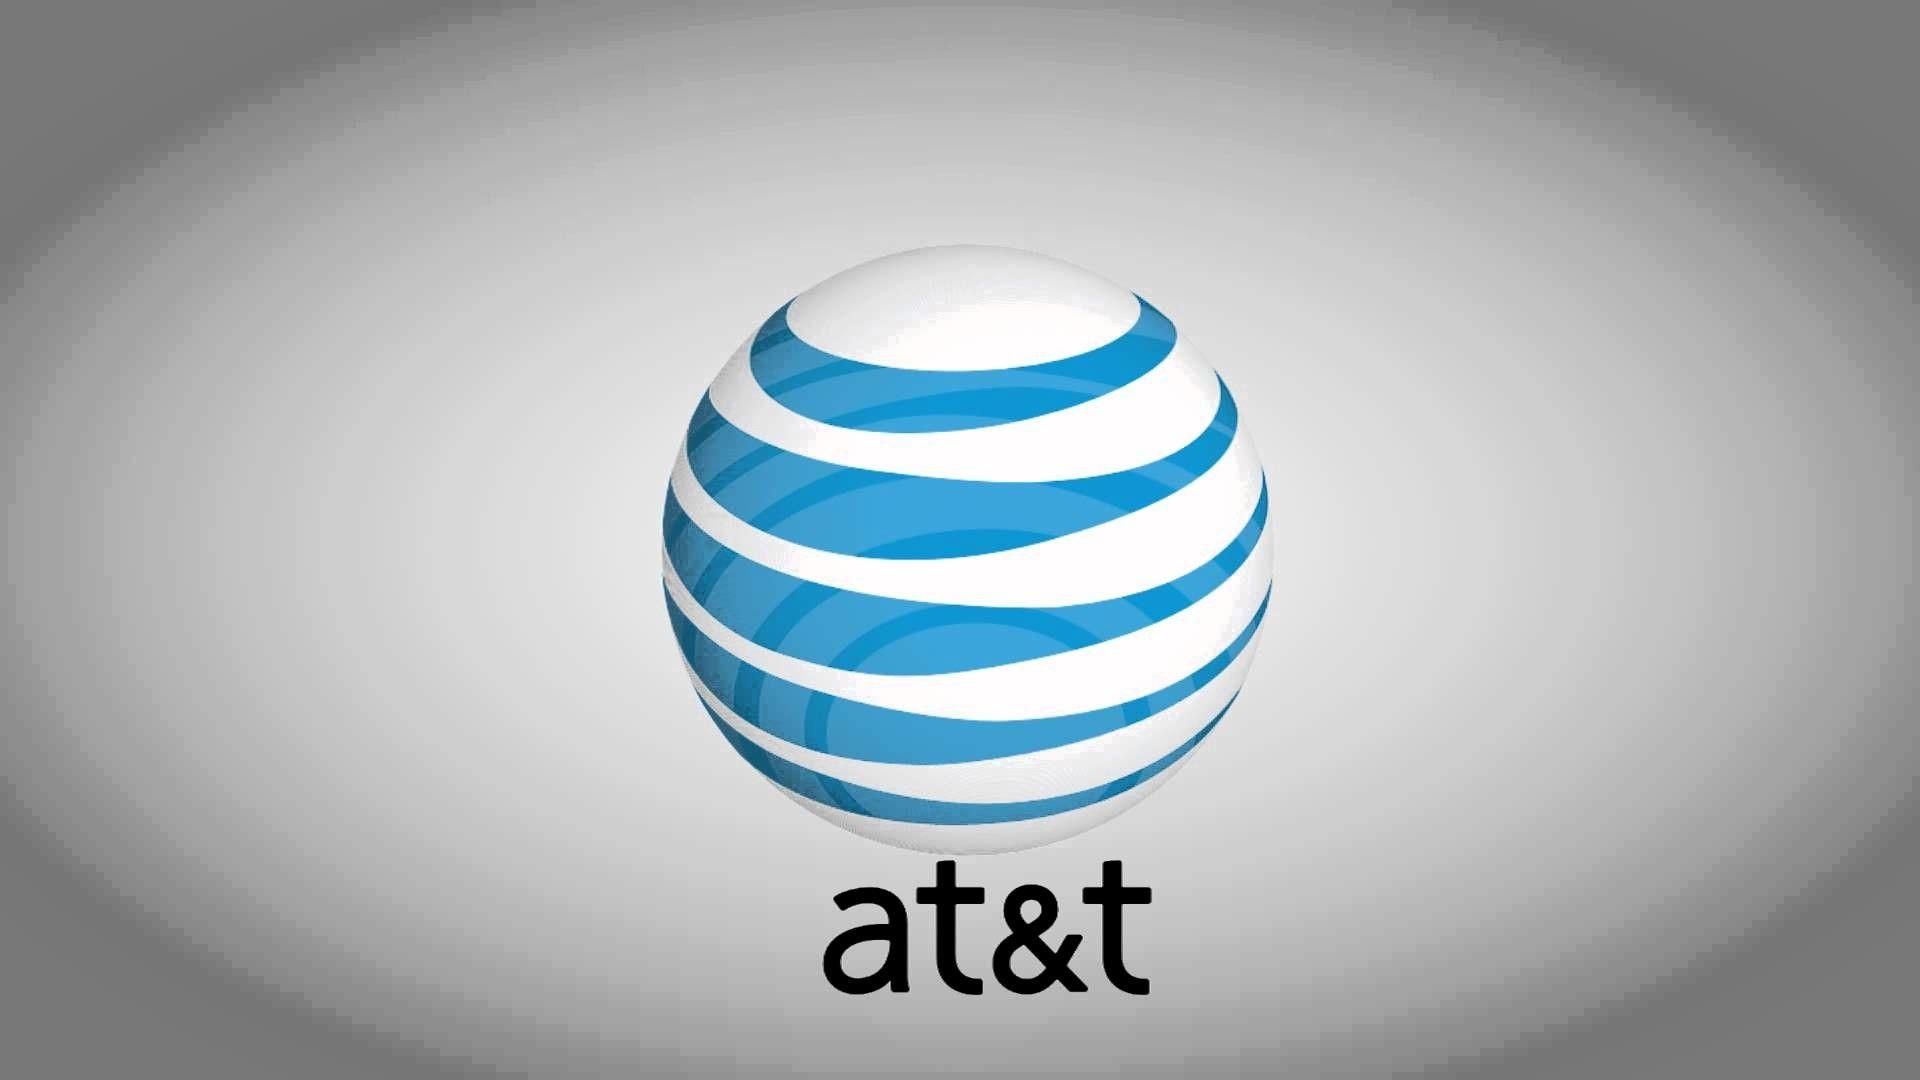 AT&T Wallpaper Free AT&T Background